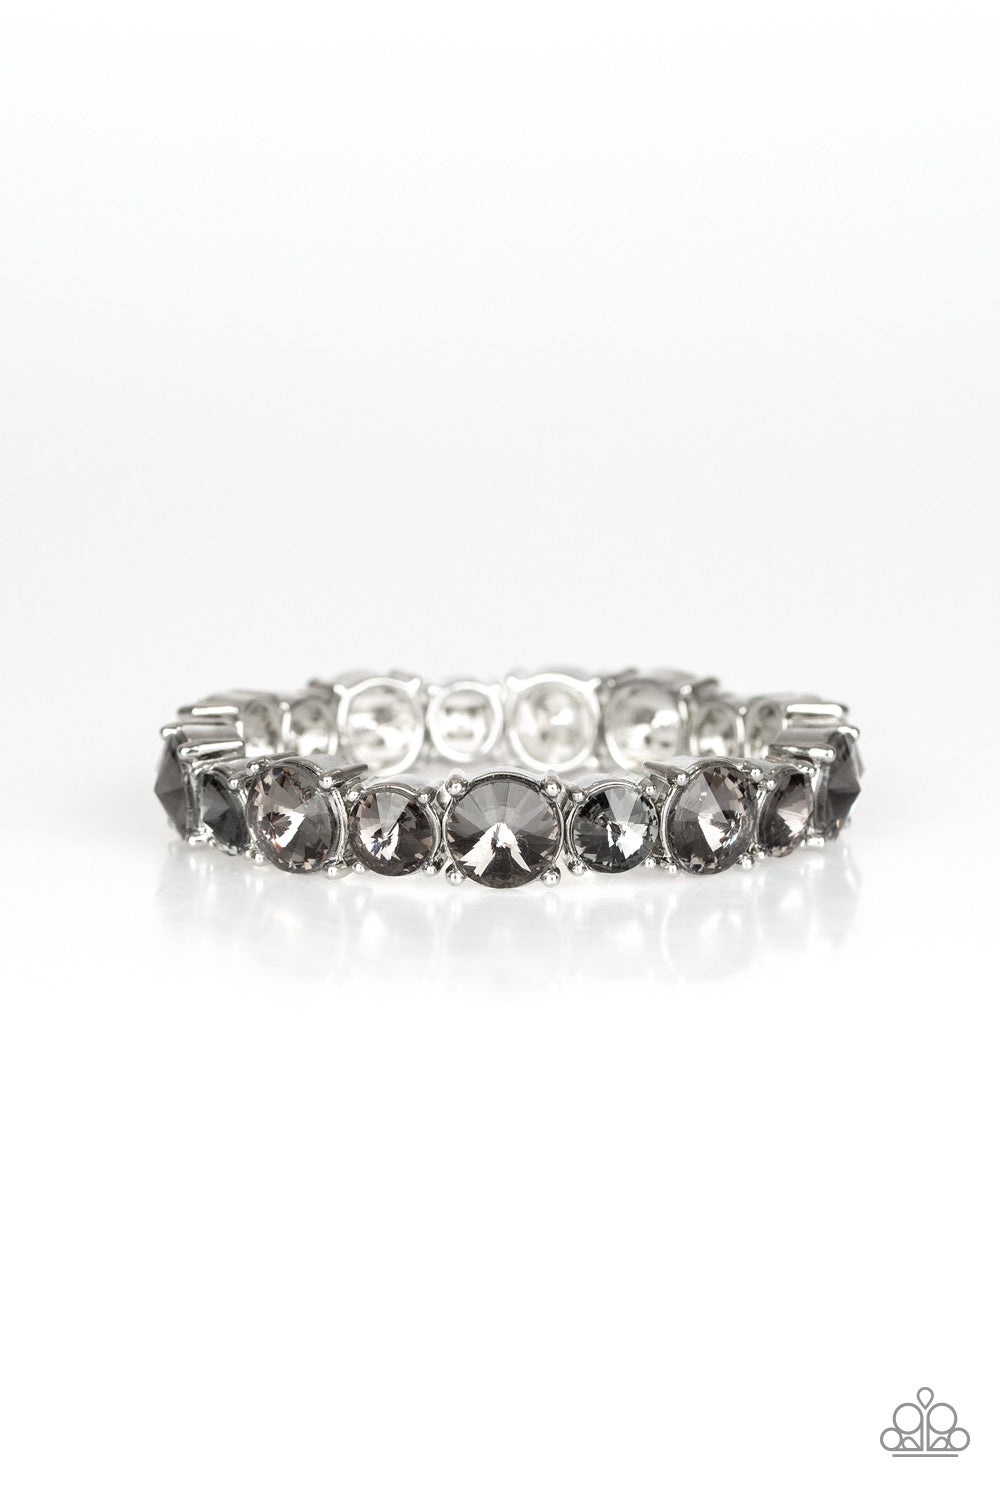 Paparazzi Born To Bedazzle - Silver Rhinestone Bracelet - A Finishing Touch 